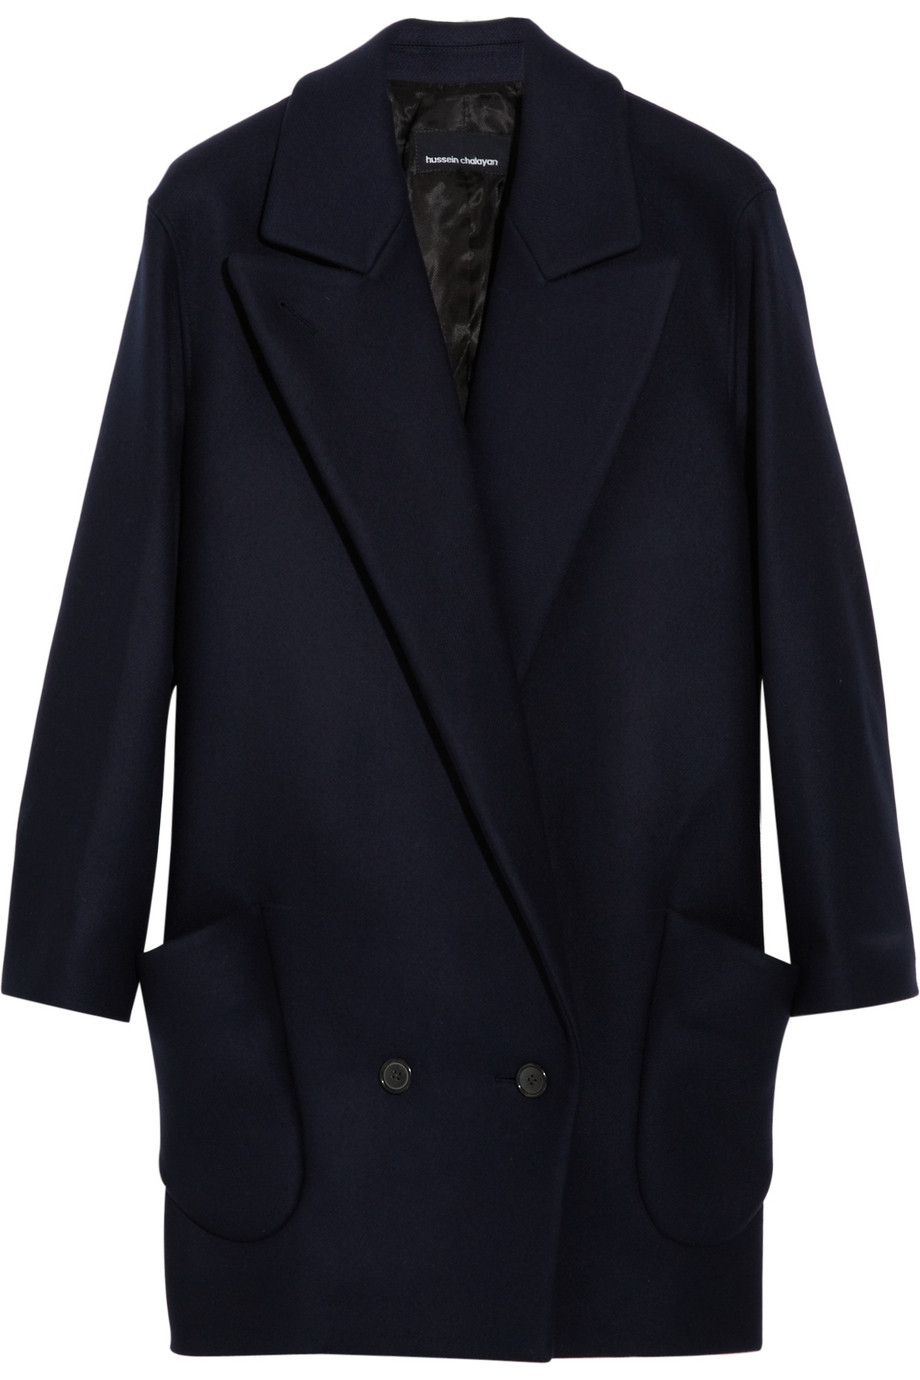 Hussein Chalayan Oversized Wool-blend Coat in Blue (navy) | Lyst